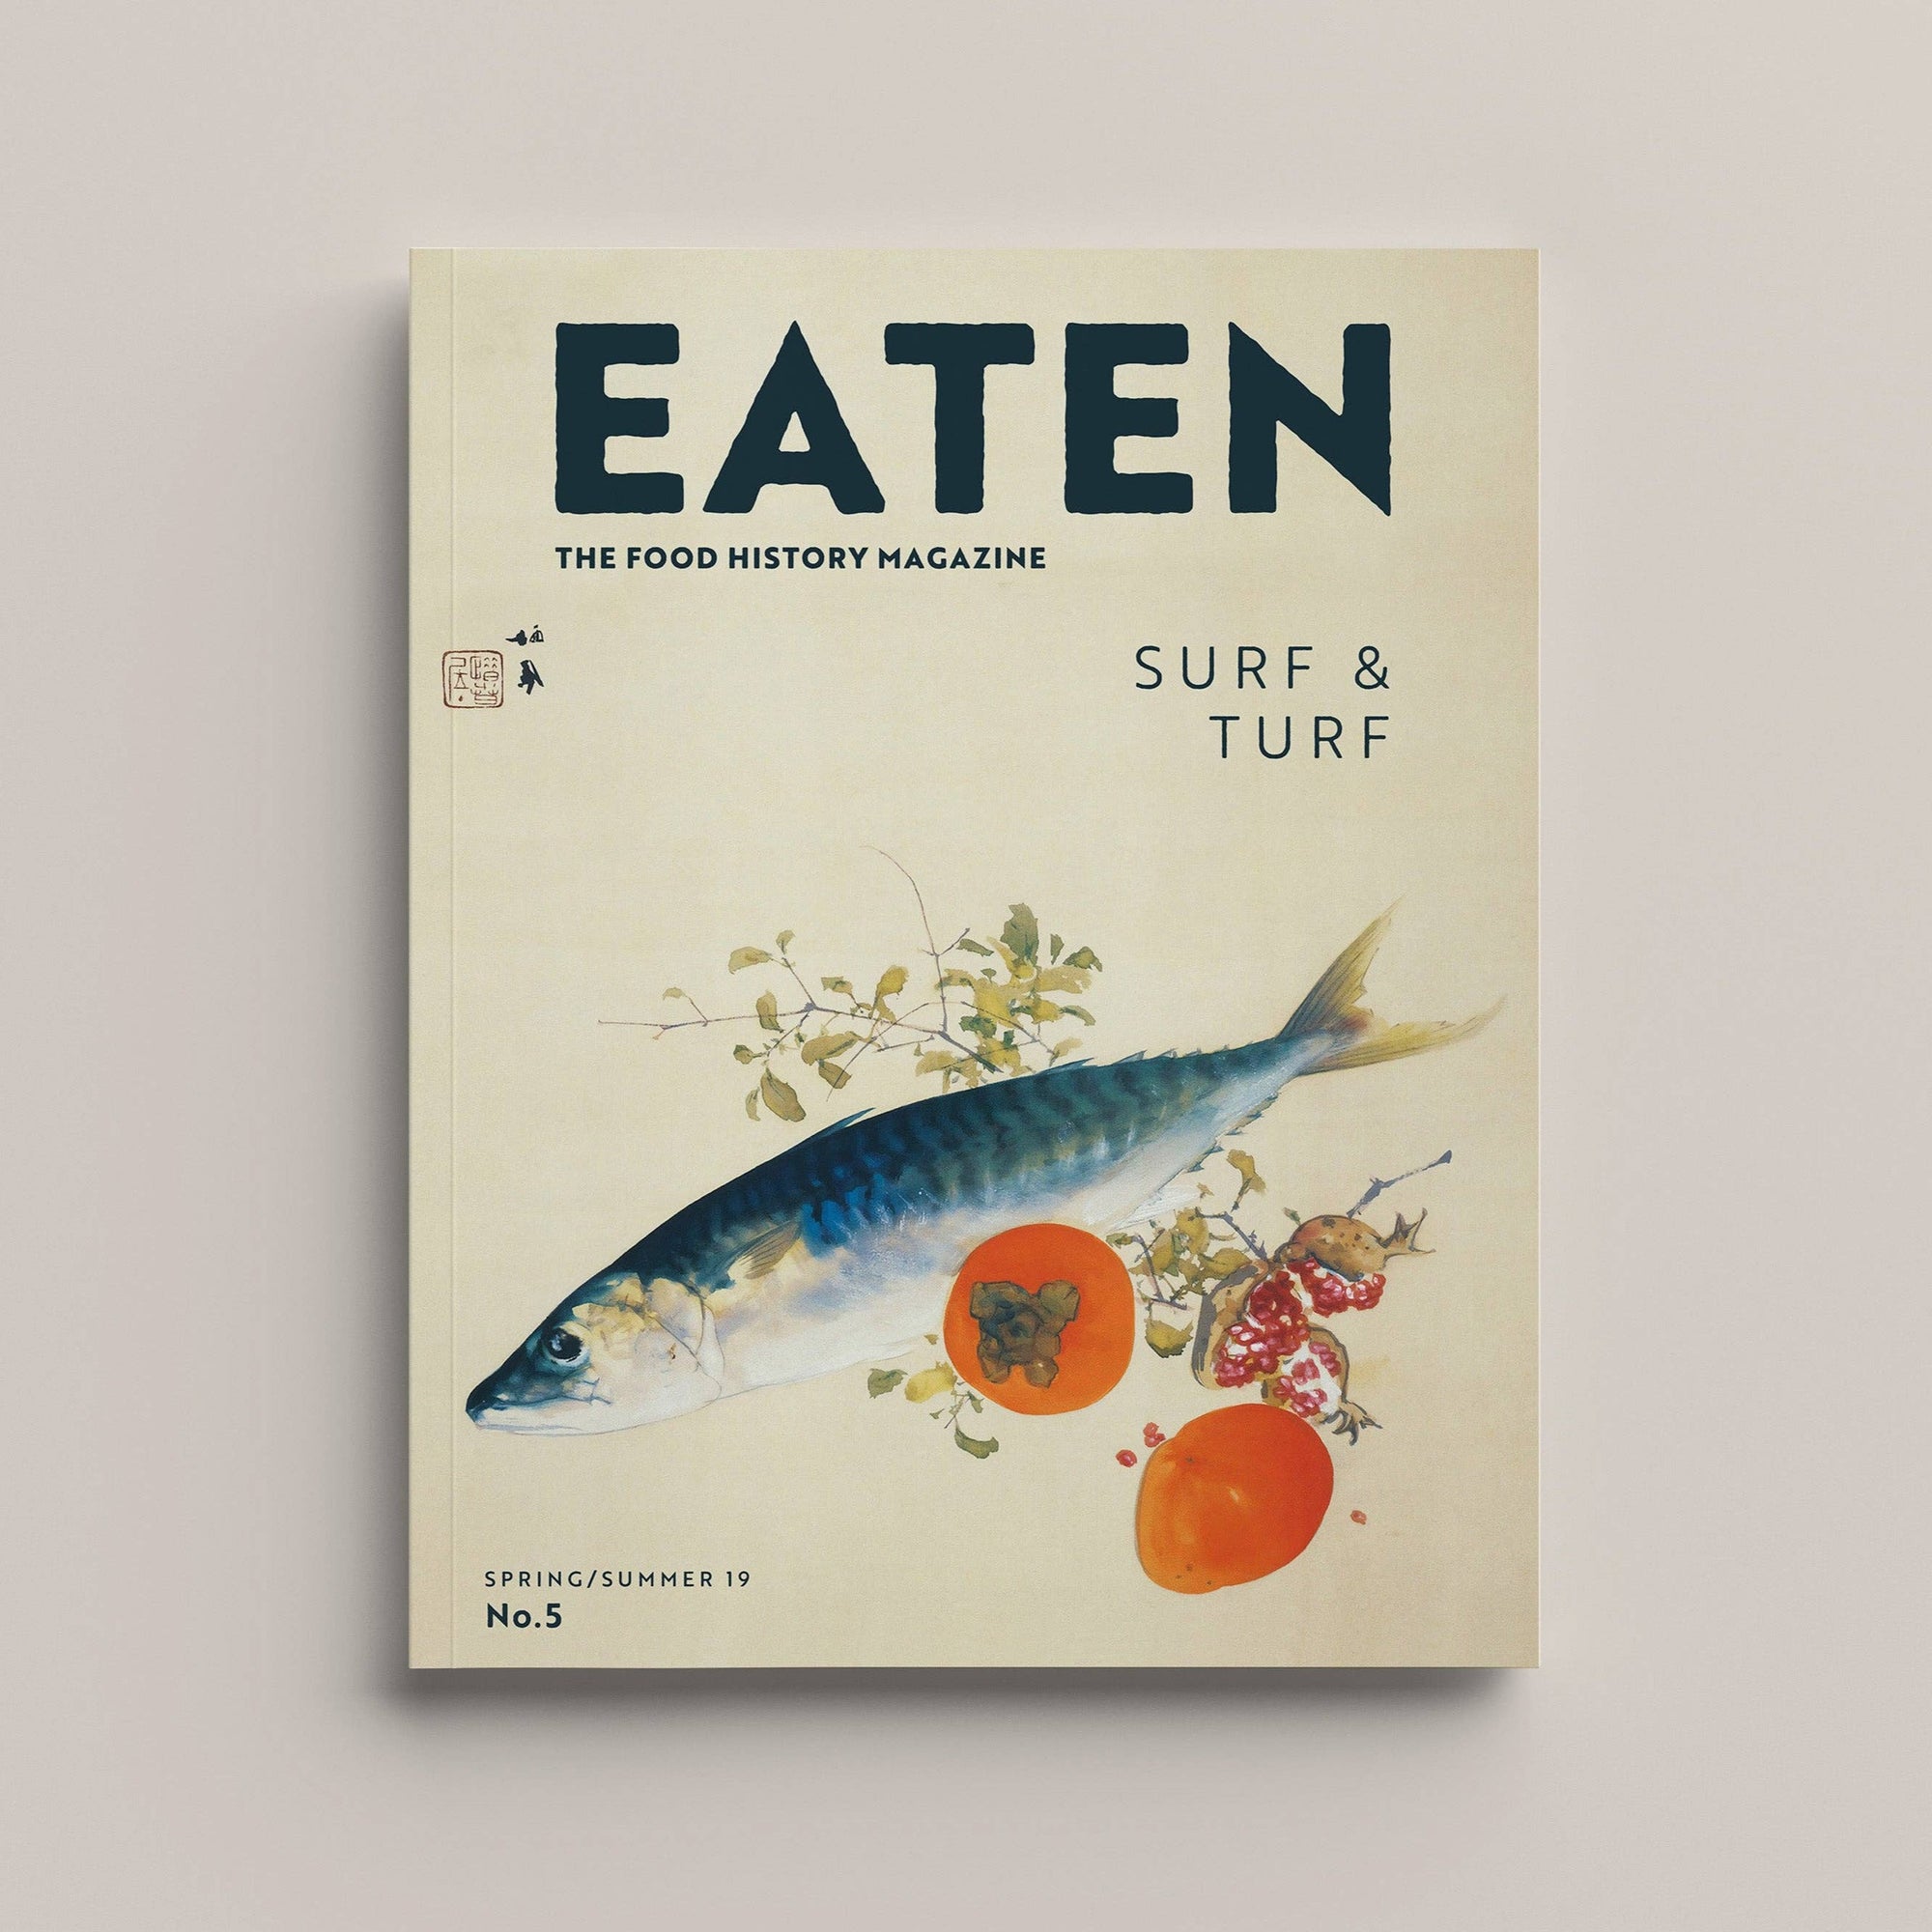 EATEN Magazine - No. 5: Surf and Turf - Space Camp